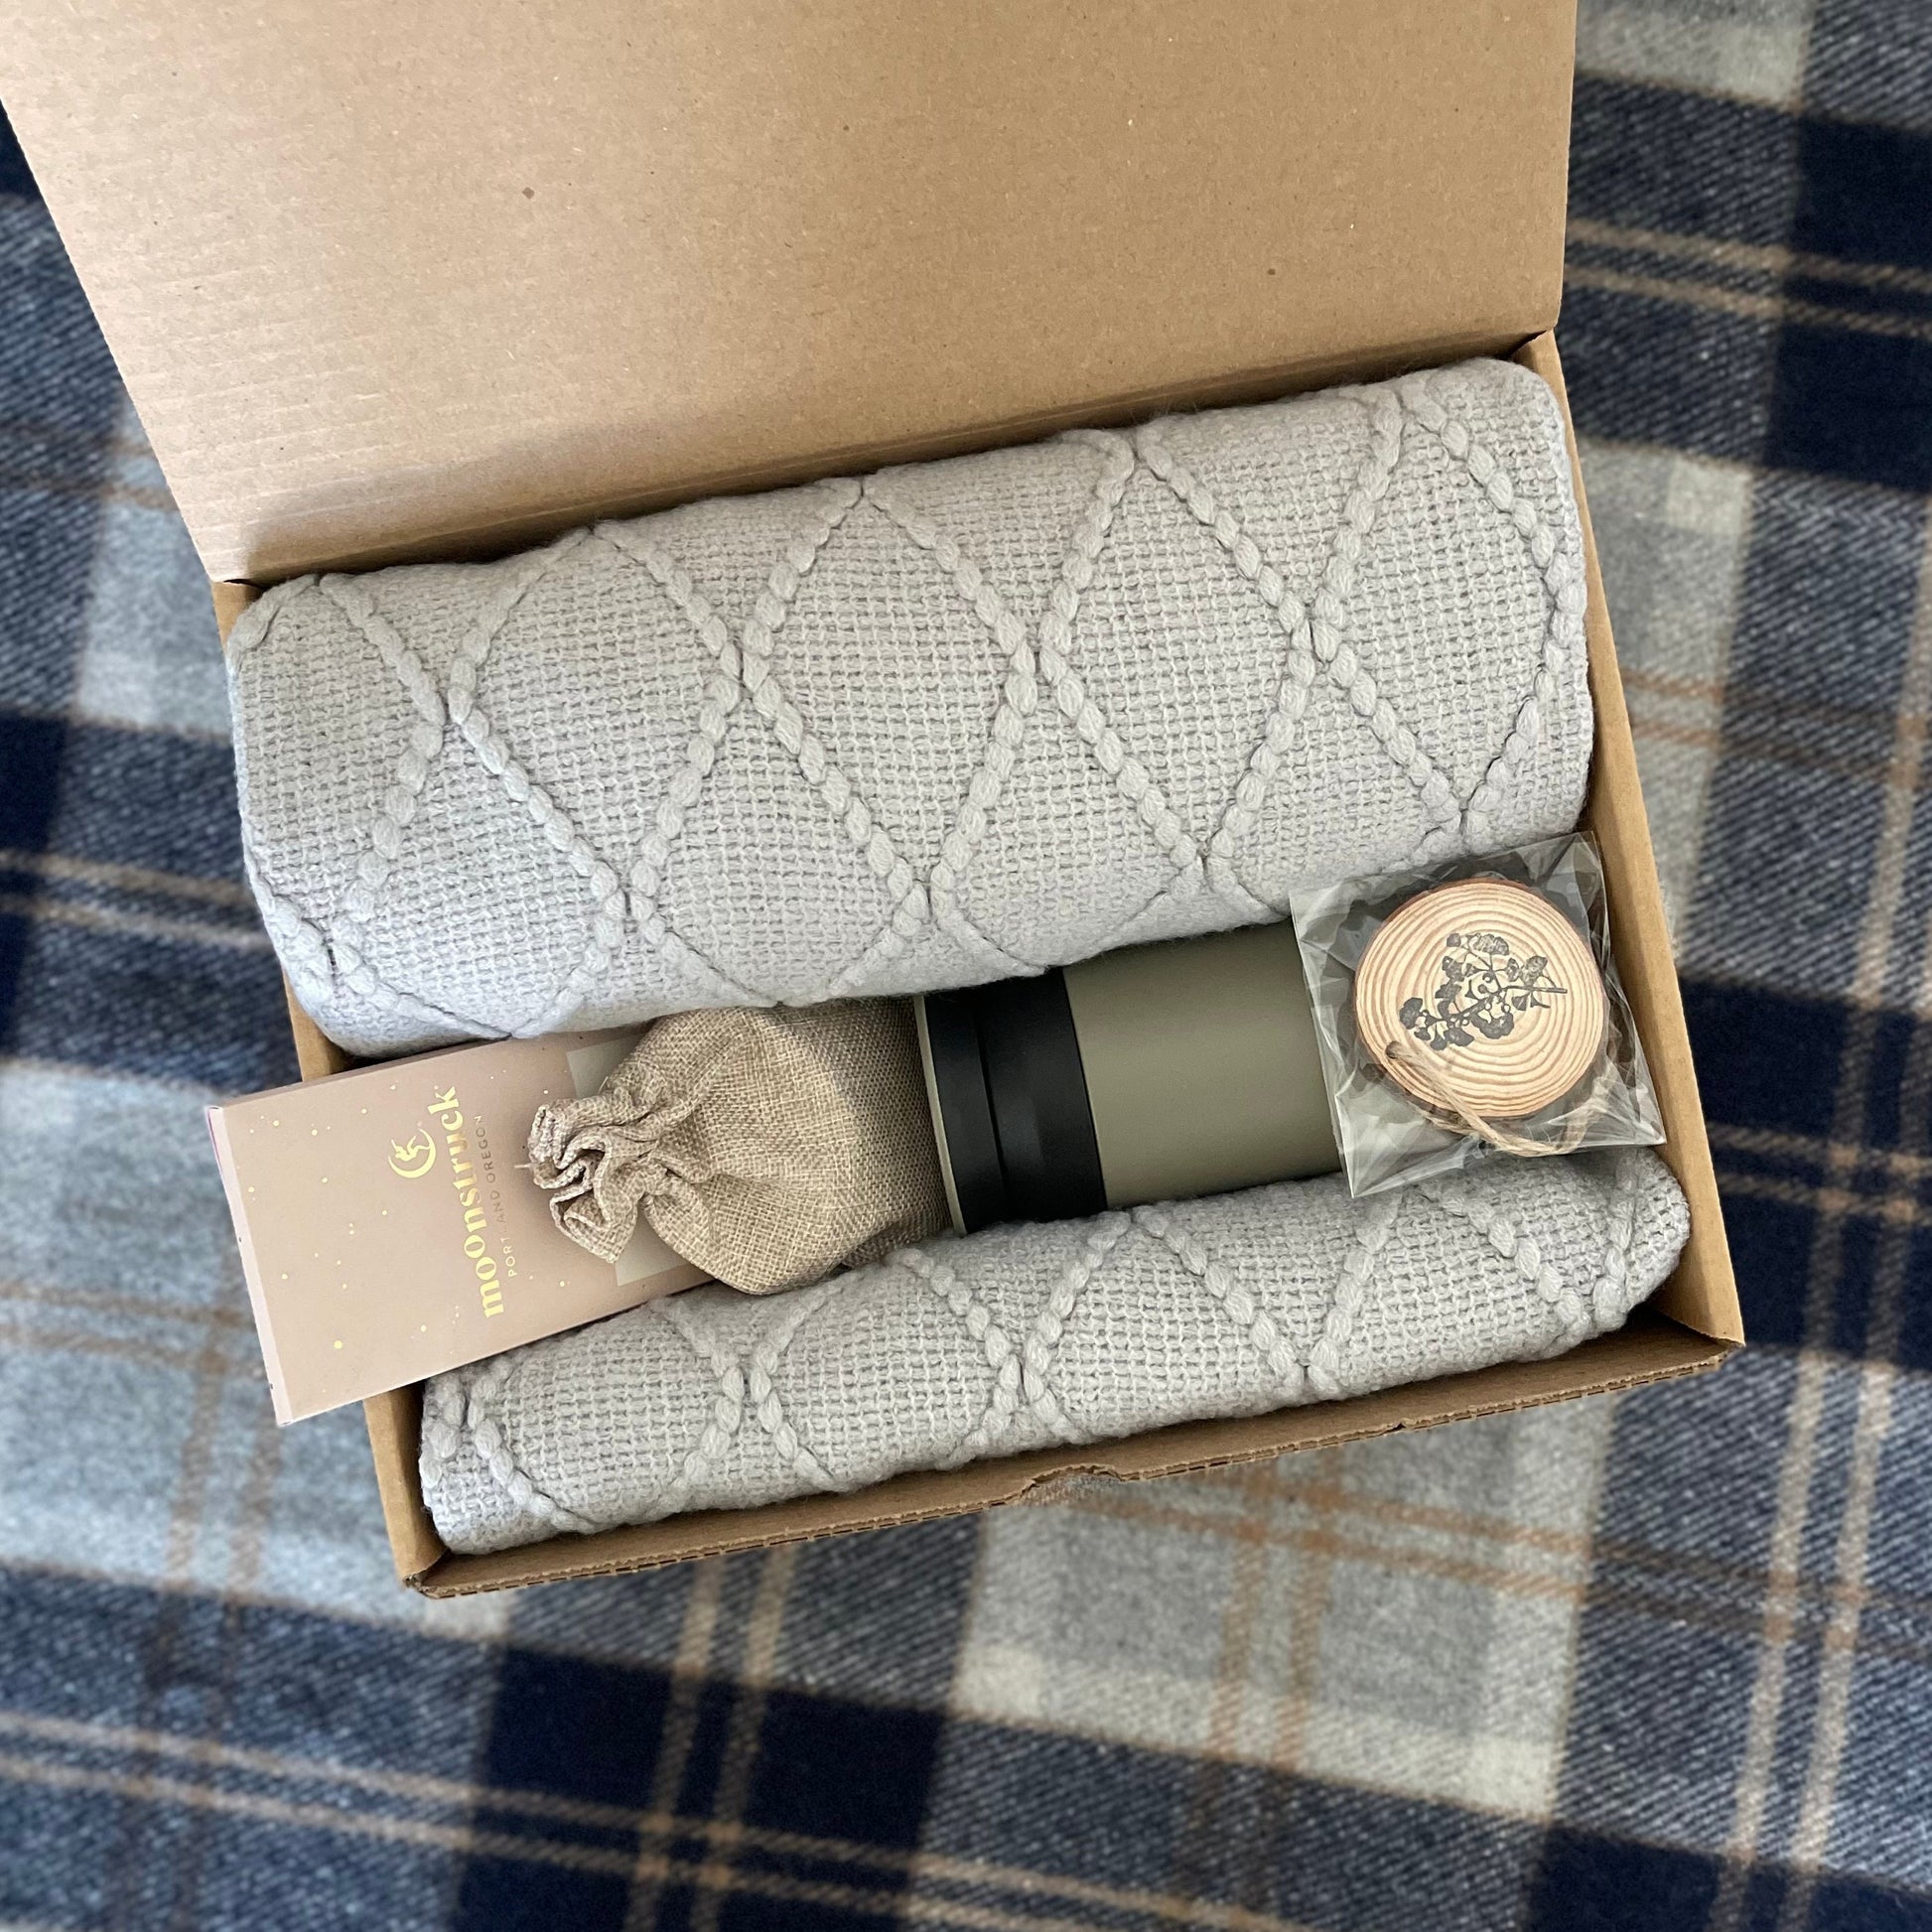 Hygge Gift Box with Blanket for DAD | Best Dad Present, Gift for Father's Day, Father’s Day Gift for Stepdad, Grandfather, Godfather, Dad - happyhyggegifts.com